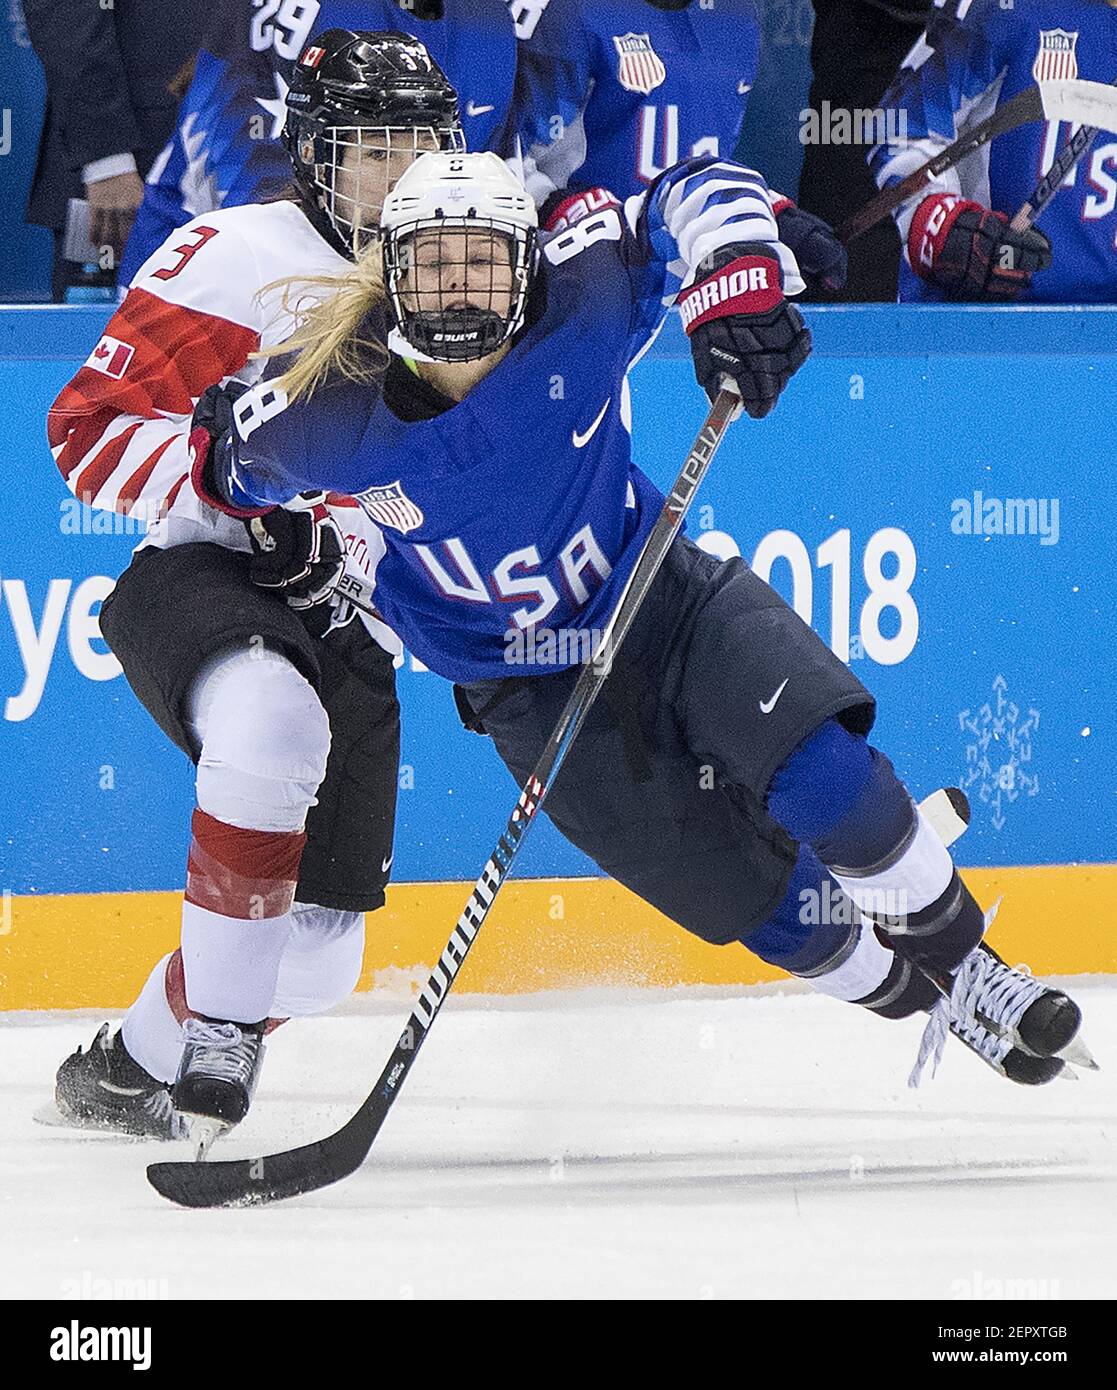 The United States meets Canada in the Gold Medal game on Thursday, Feb. 22, 2018, at South Korea's Gangneung Hockey Centre during the Pyeongchang Winter Olympics. (Photo by Carlos Gonzalez/Minneapolis Star Tribune/TNS/Sipa USA) Stock Photo